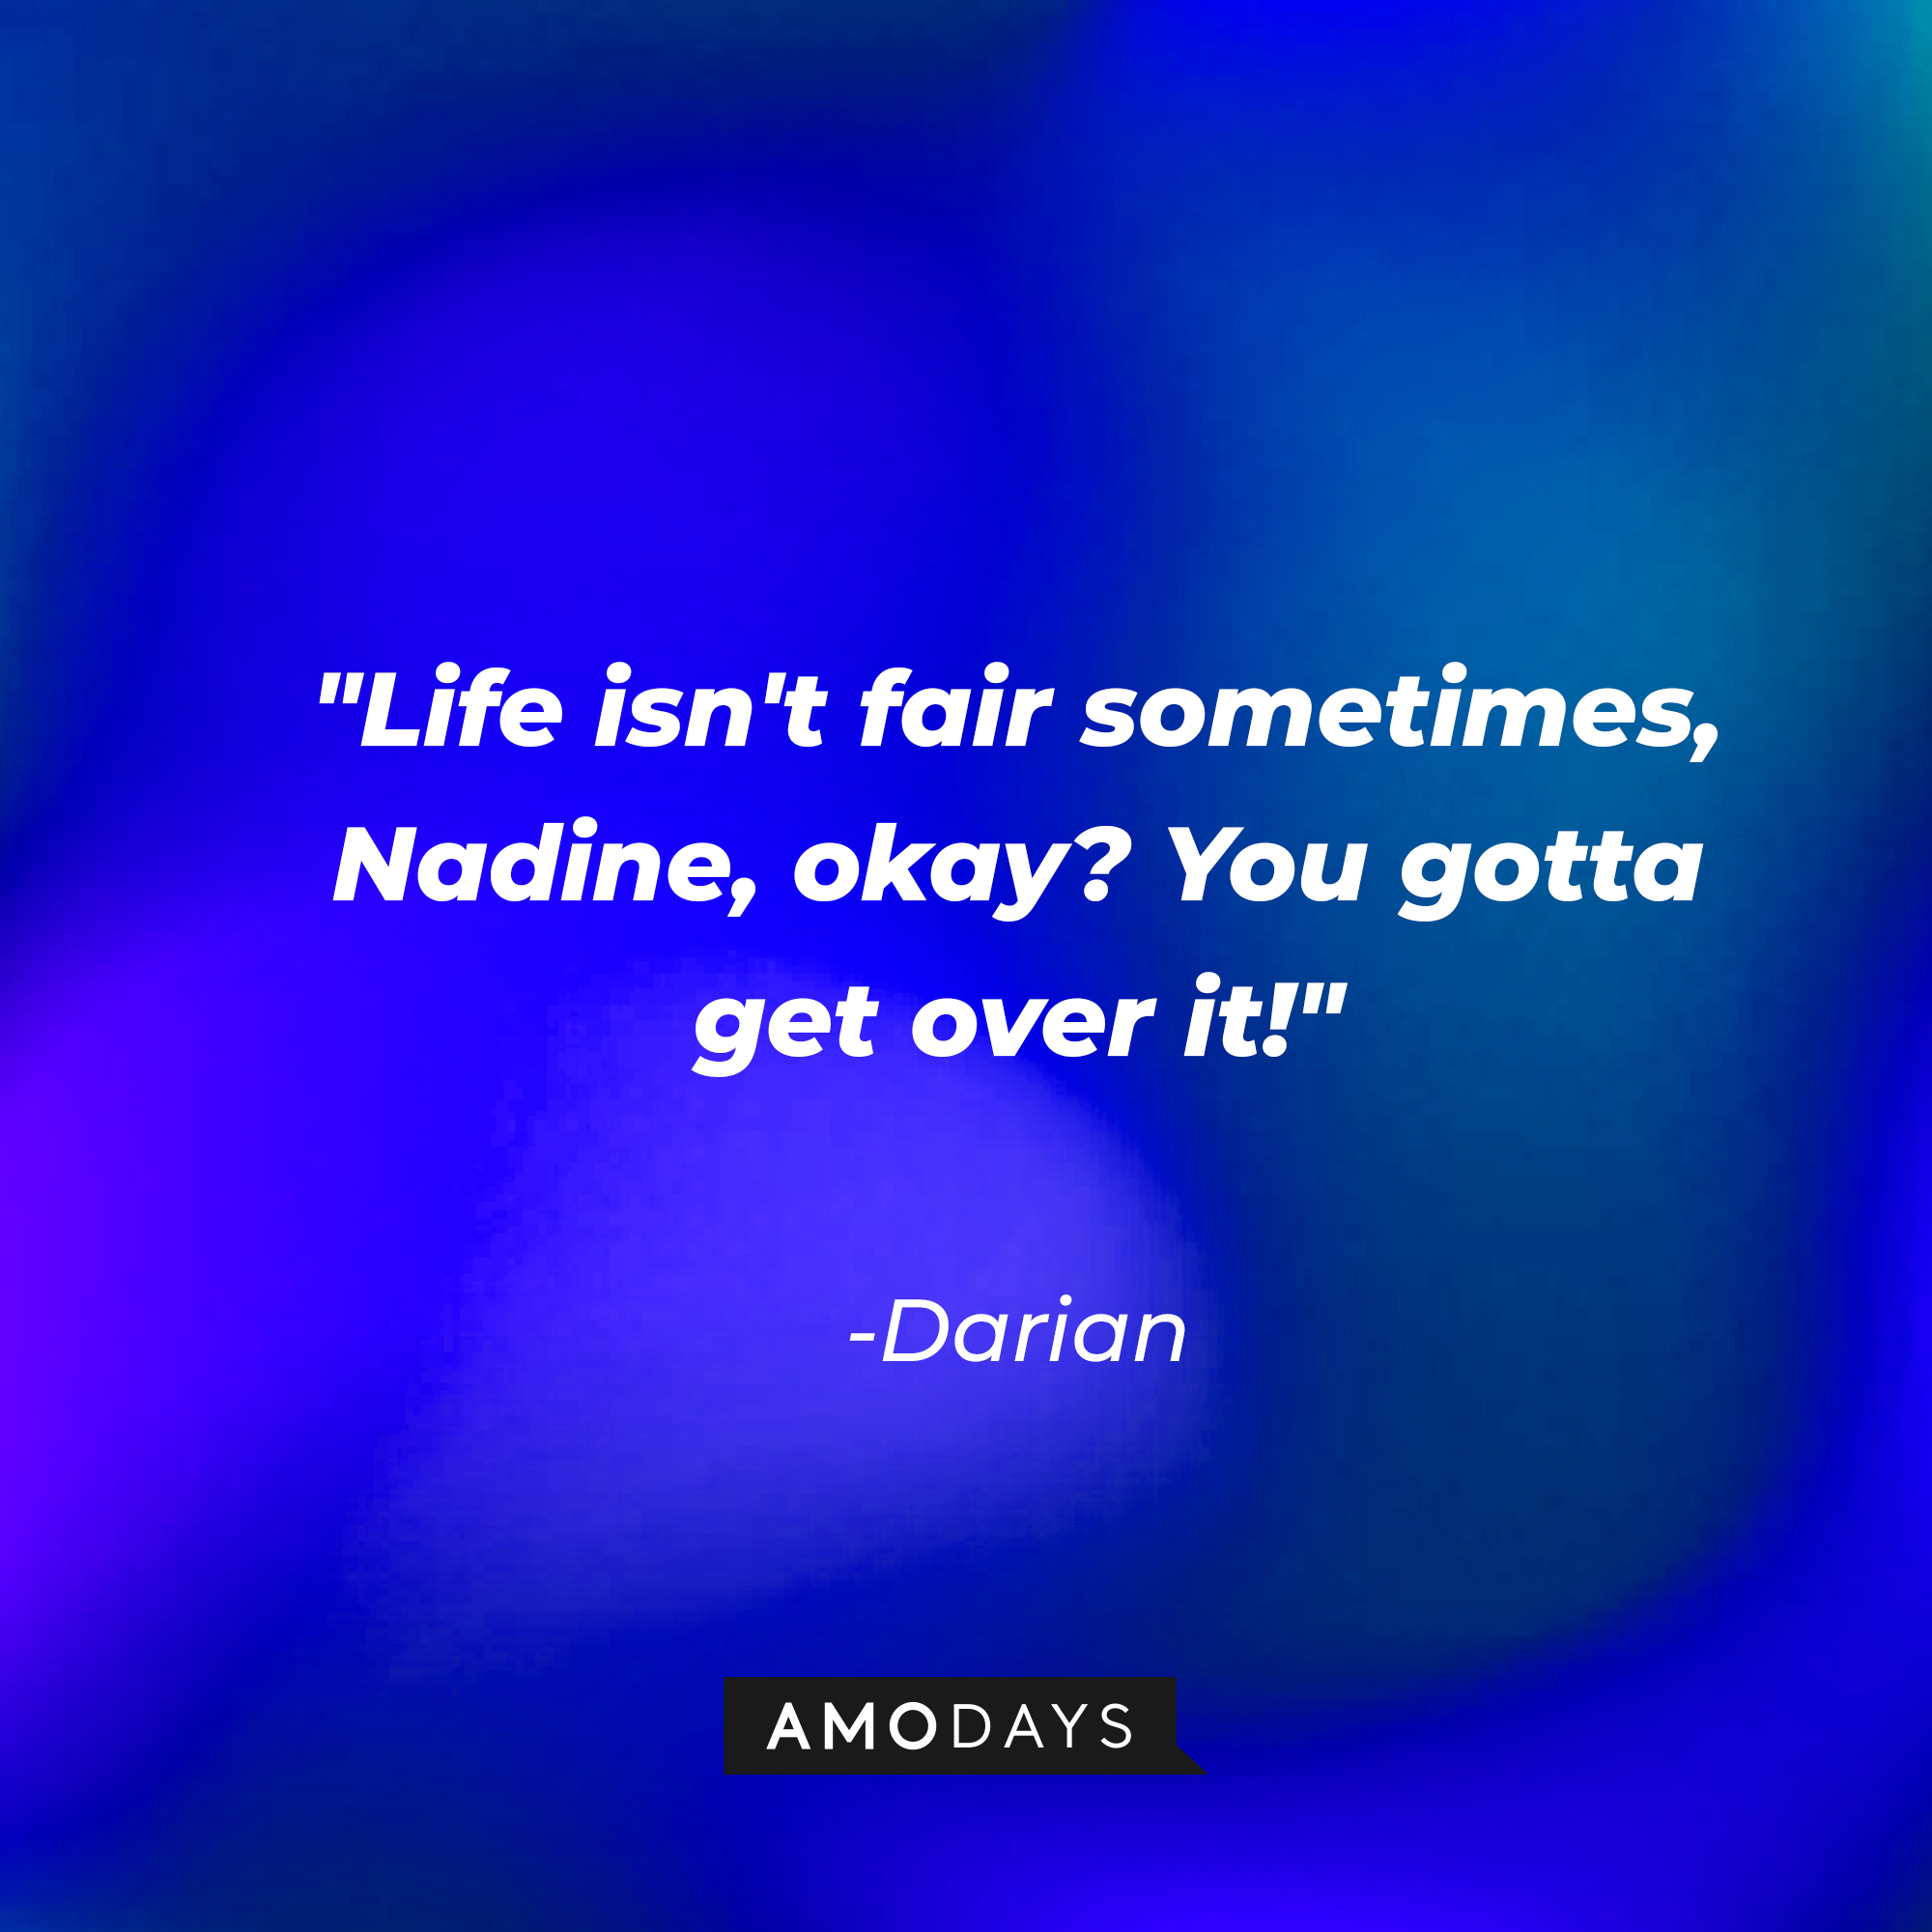 Darian's quote: "Life isn't fair sometimes, Nadine, okay? You gotta get over it!" | Source: AmoDays